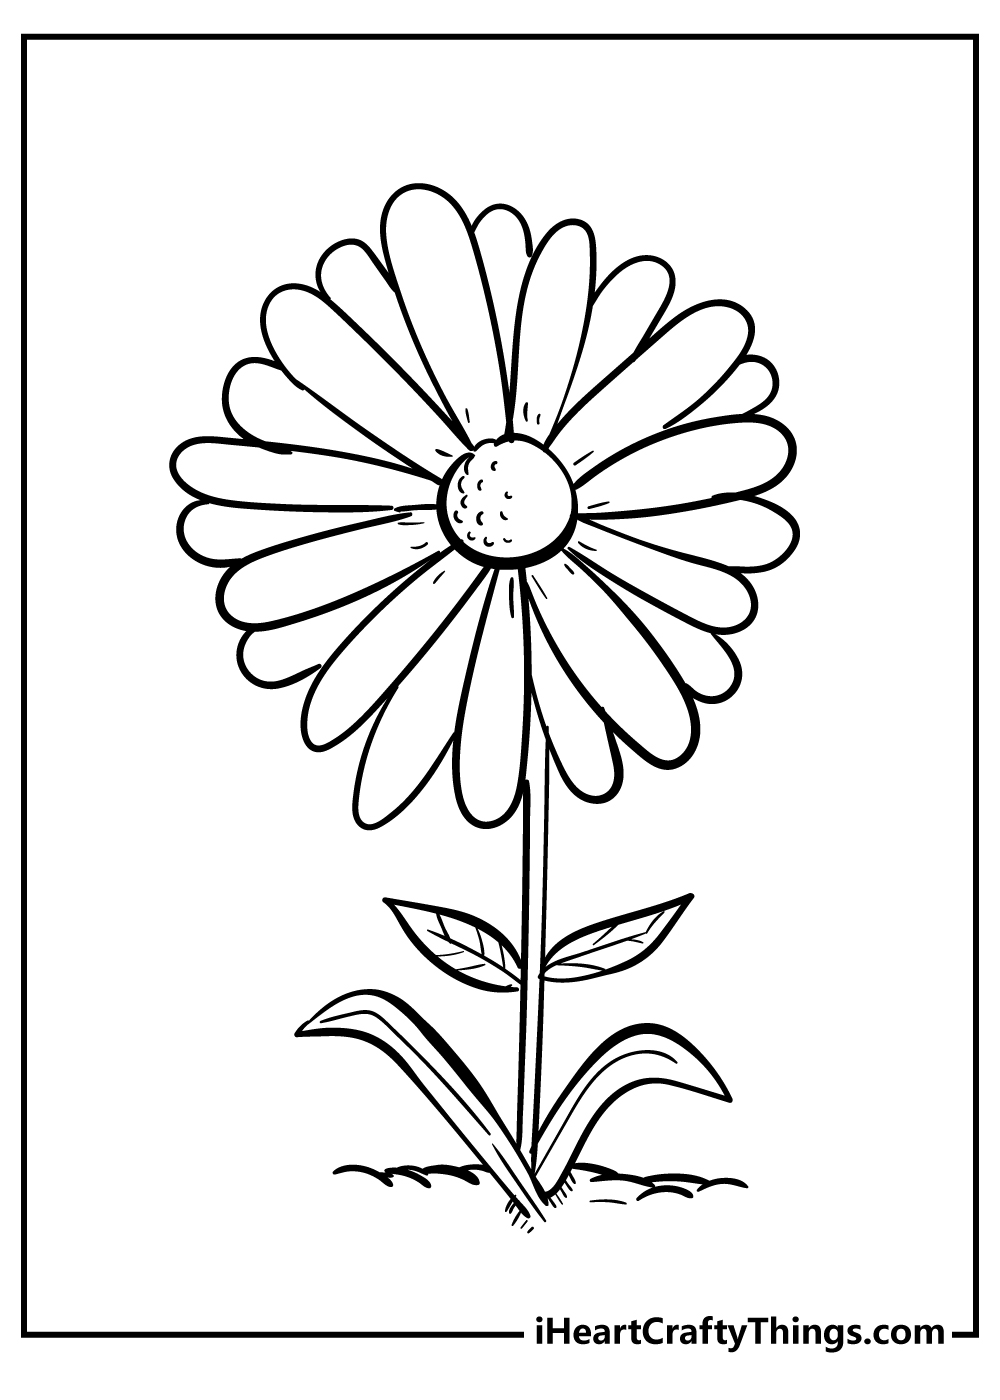 Daisy Coloring Pages for kids free download